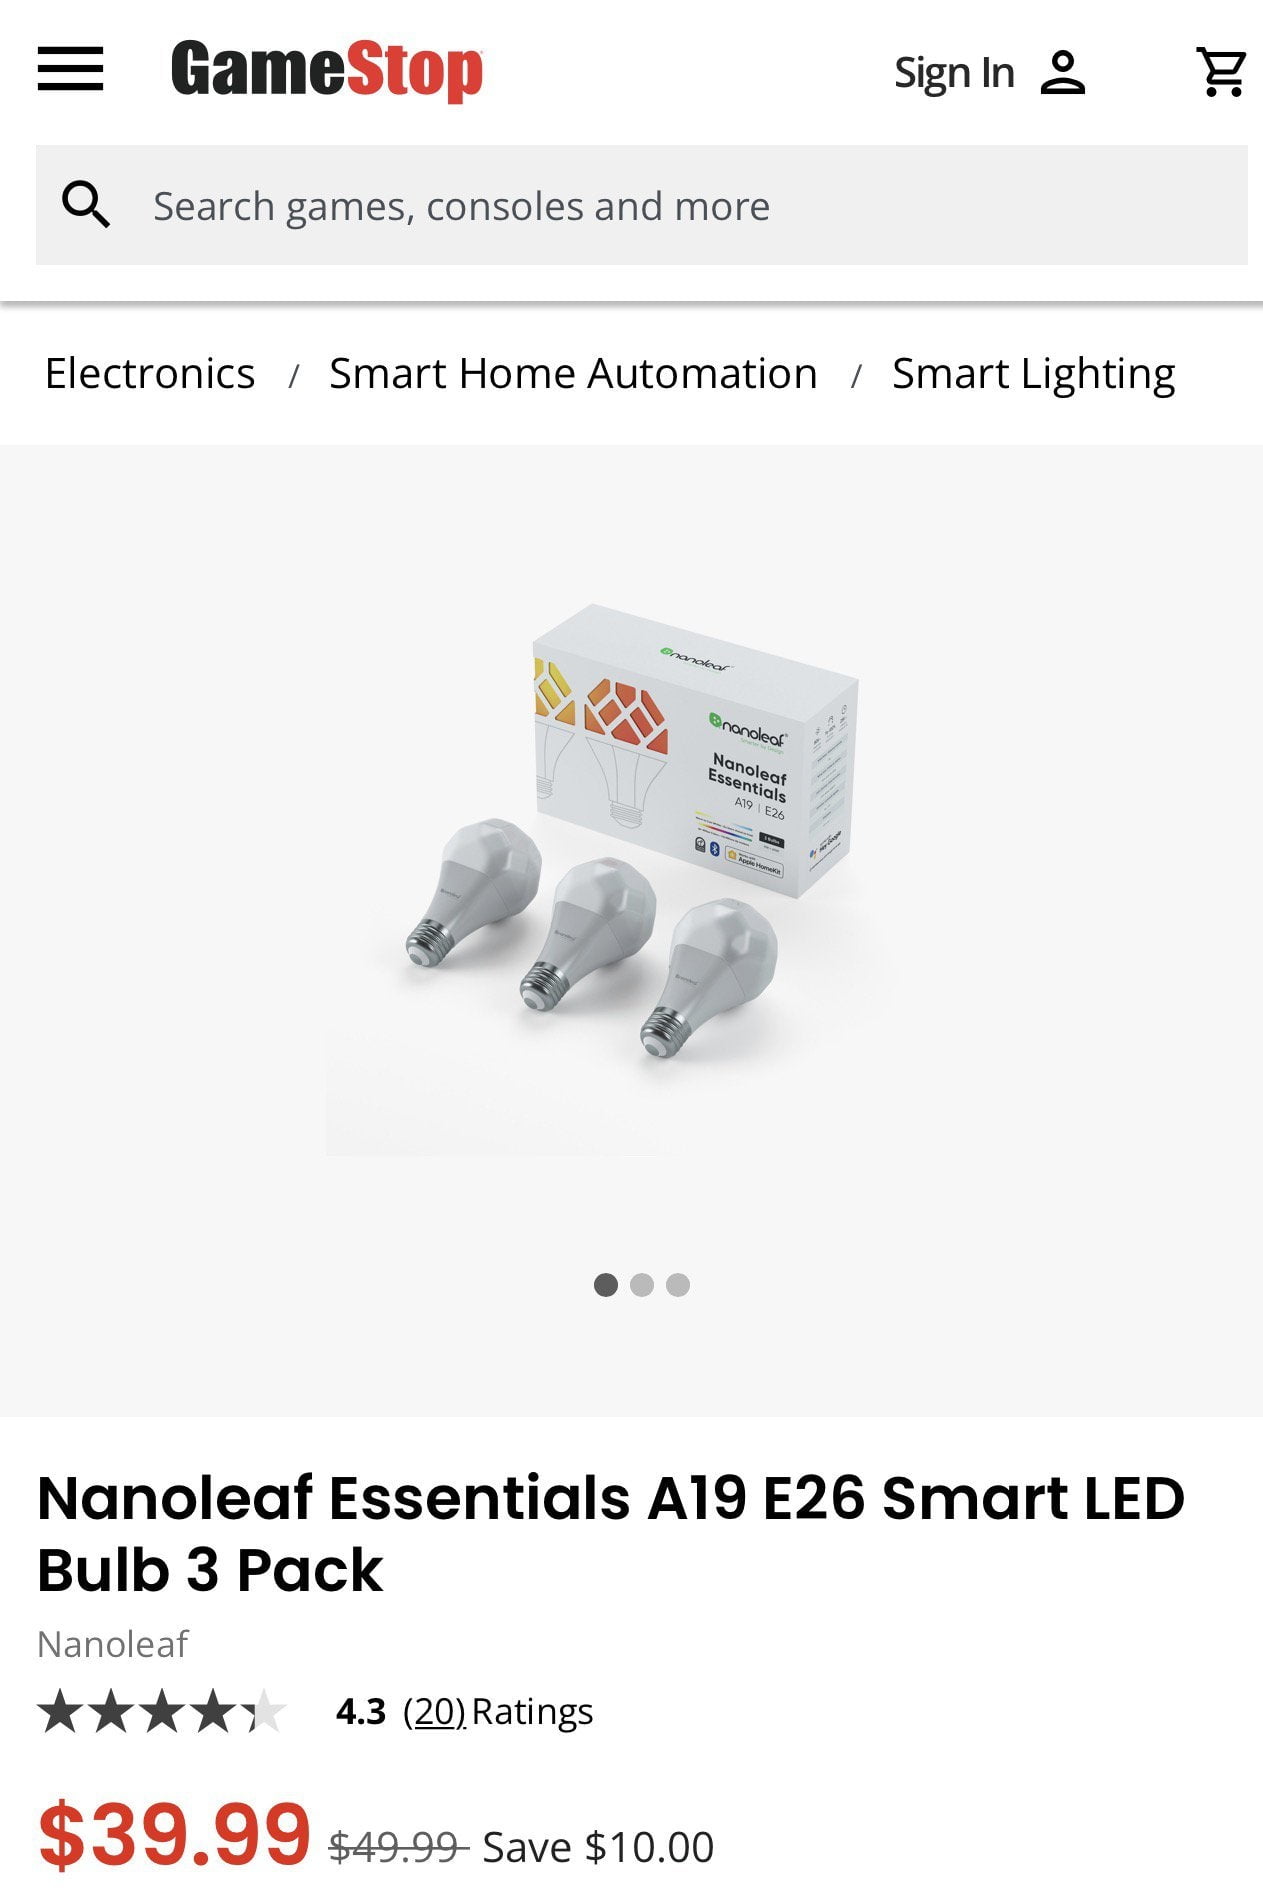 Nanoleaf bulbs cost 3999 at GameStop with free shipping